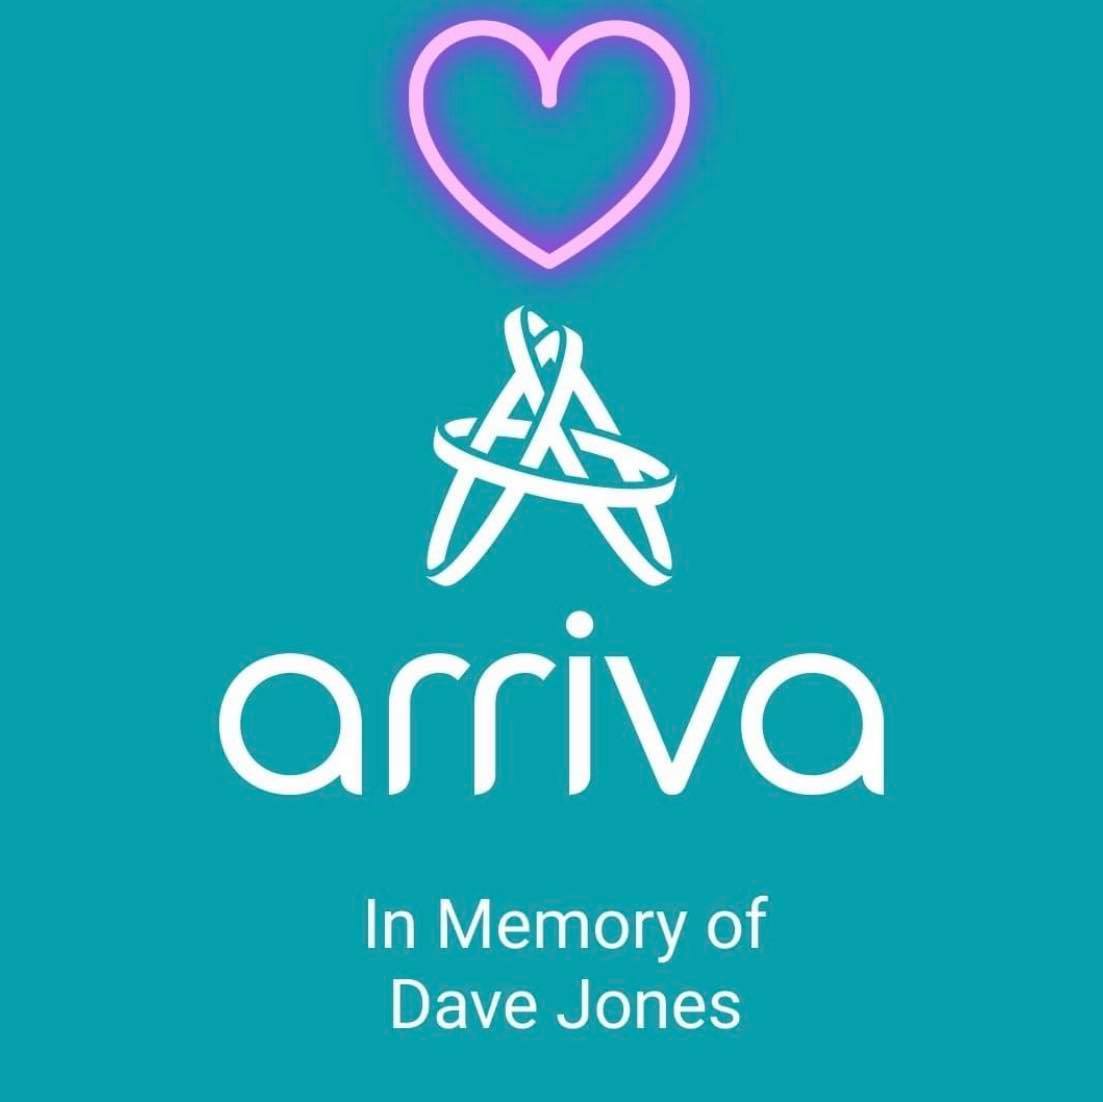 The in memory Dave Jones Facebook image being used by local Arriva drivers as their profile pictures.